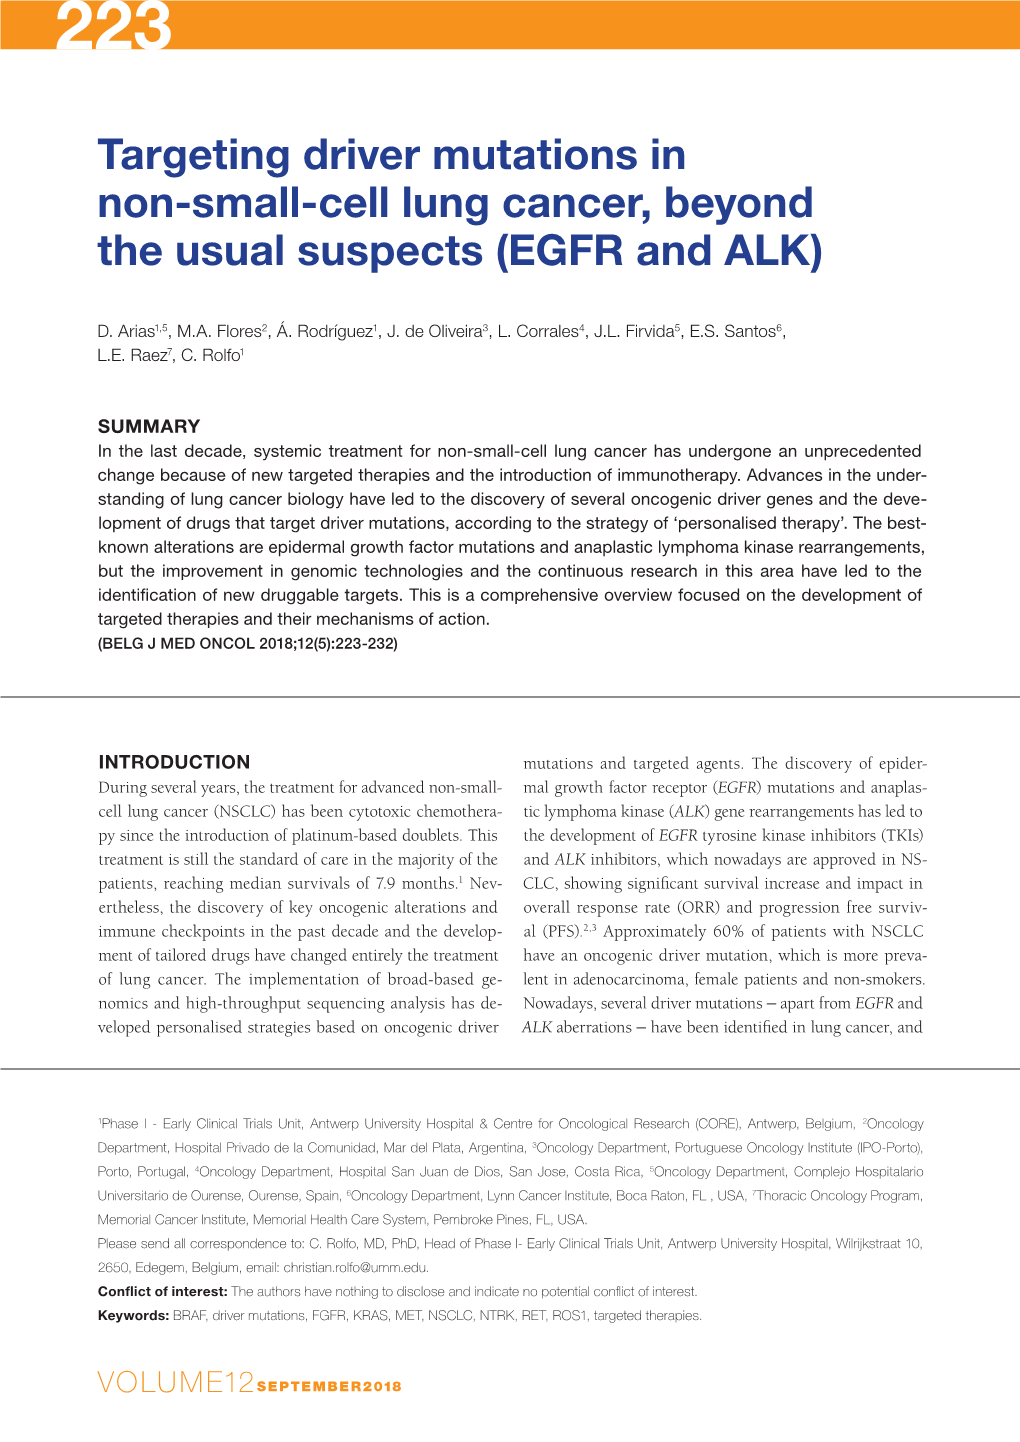 Targeting Driver Mutations in Non-Small-Cell Lung Cancer, Beyond the Usual Suspects (EGFR and ALK)